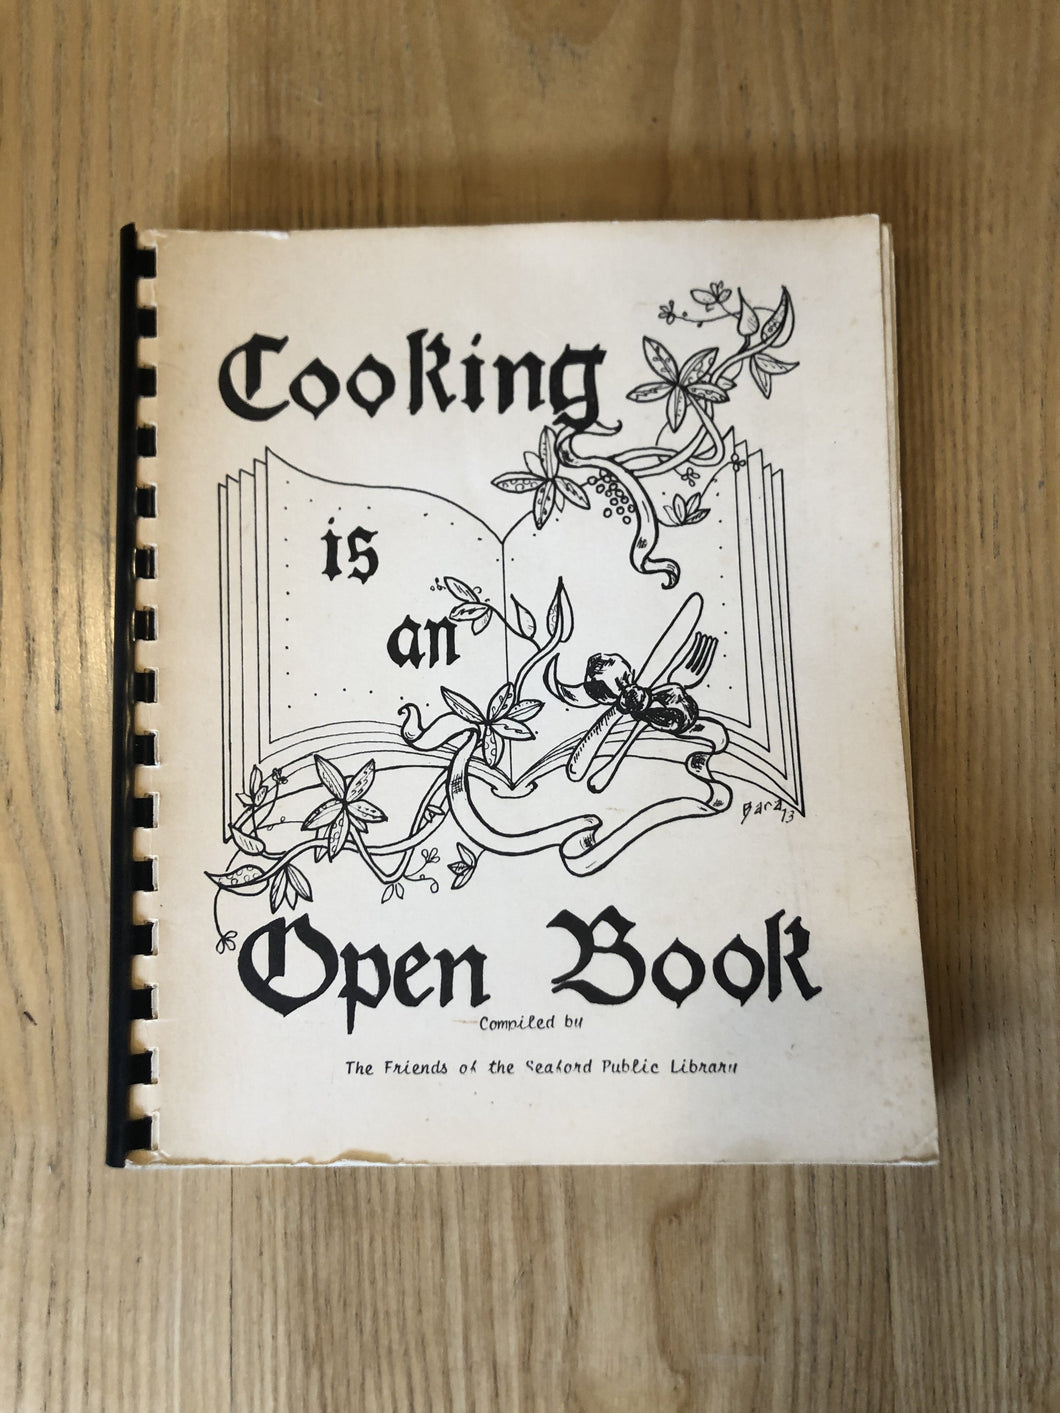 Cooking is an Open Book